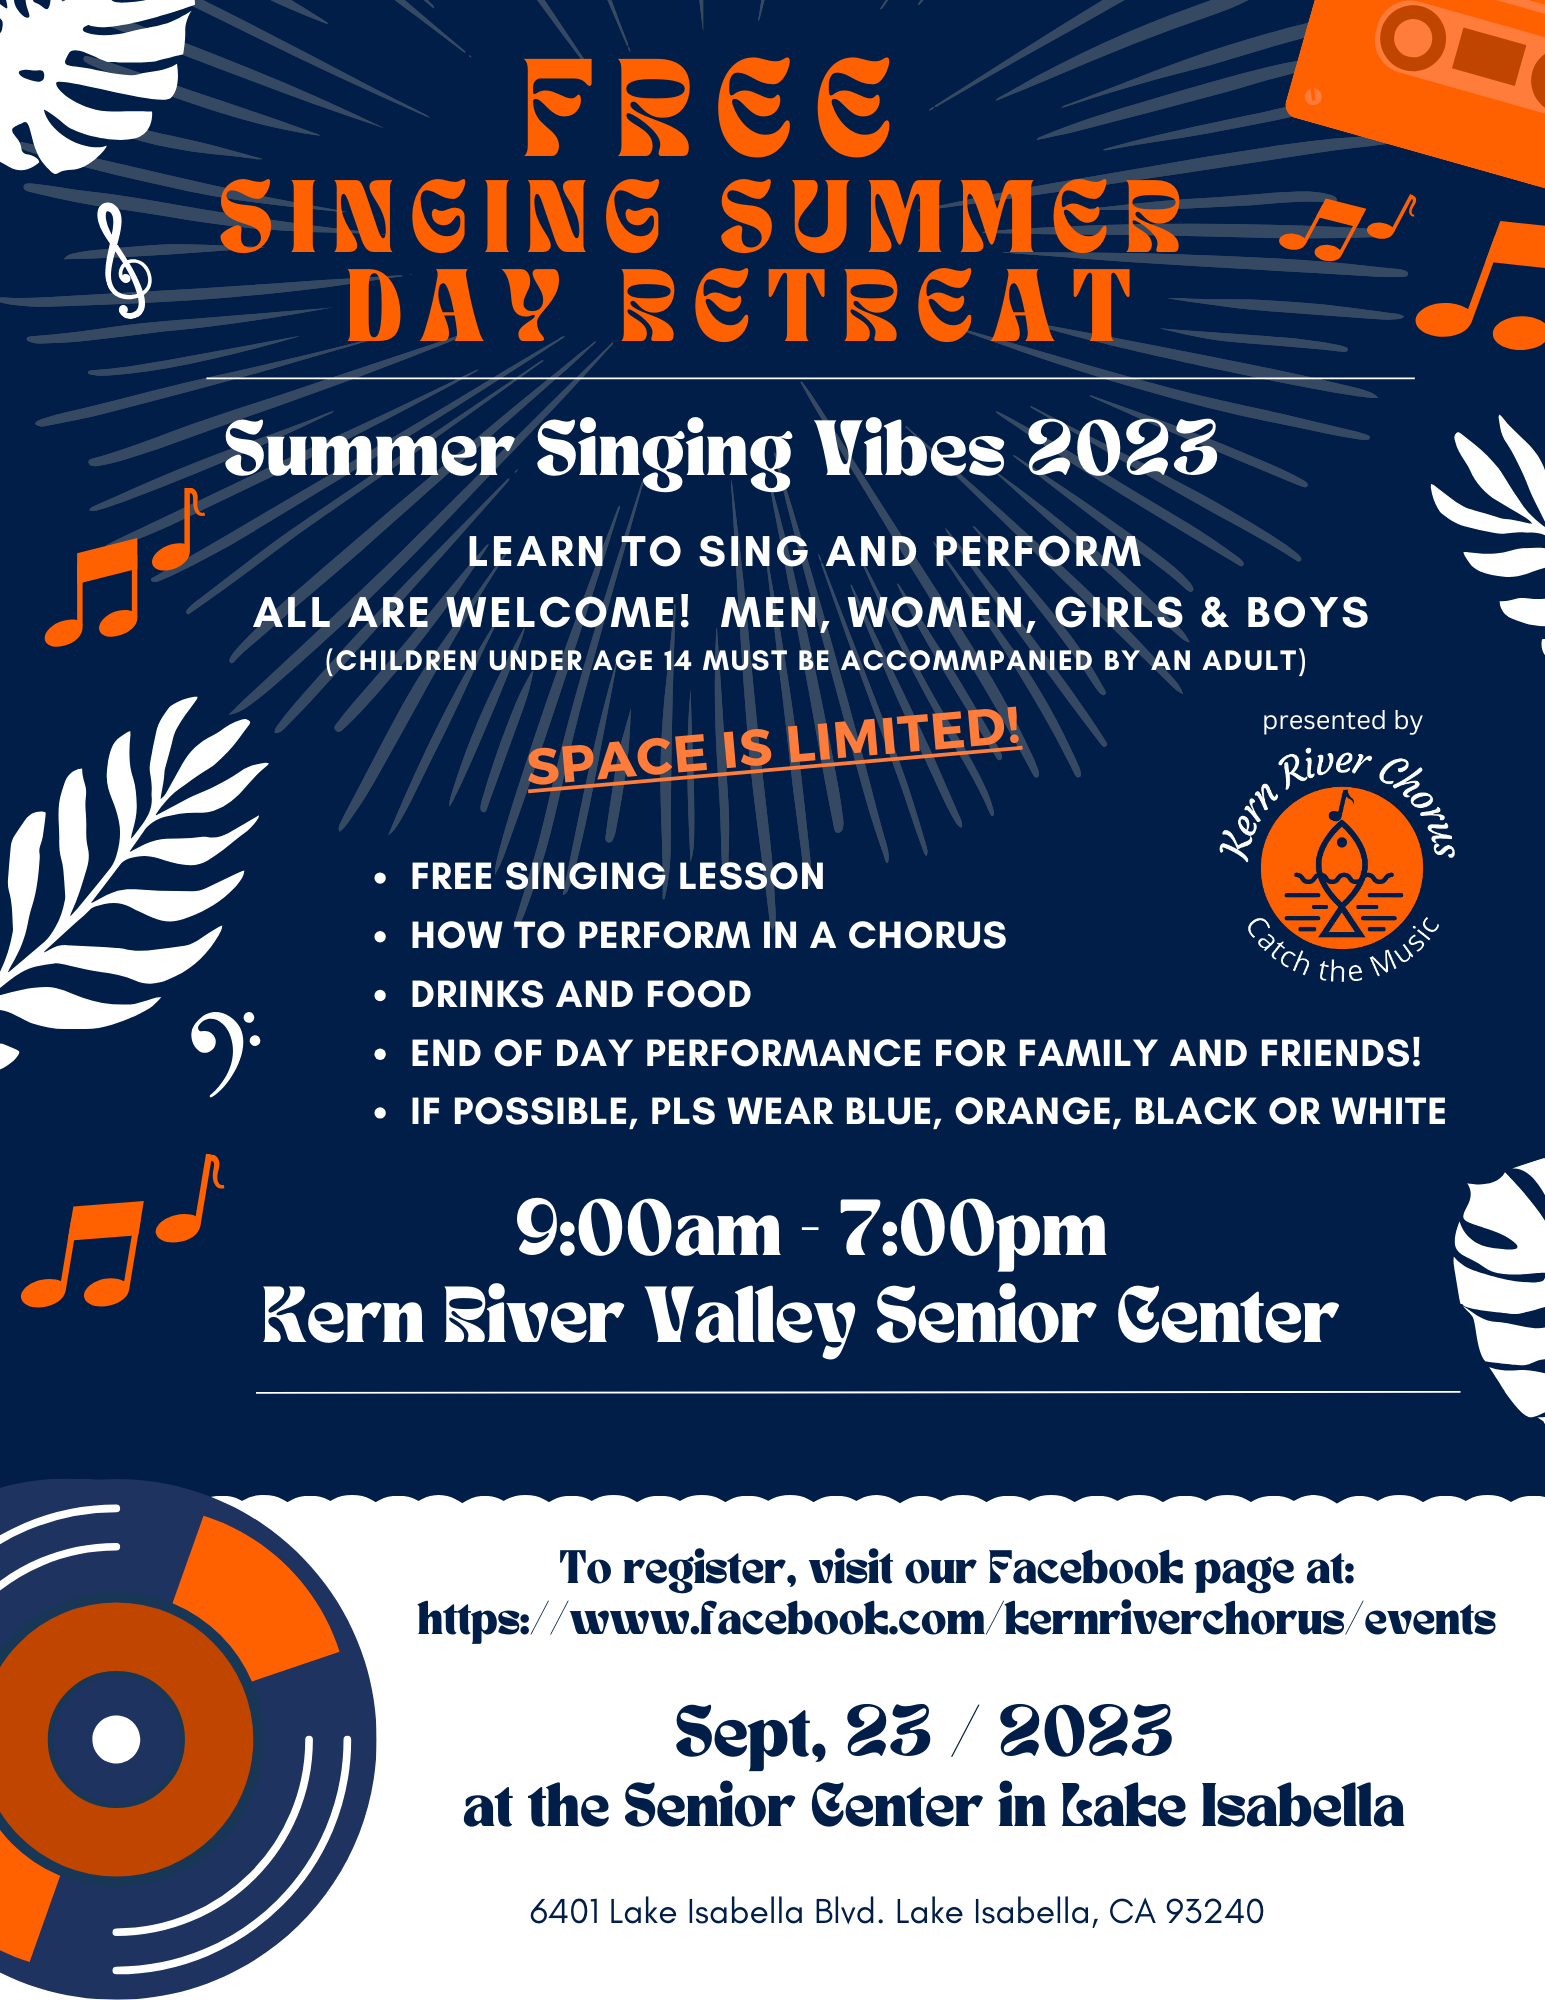 Summer Singing Vibes - One Day Retreat